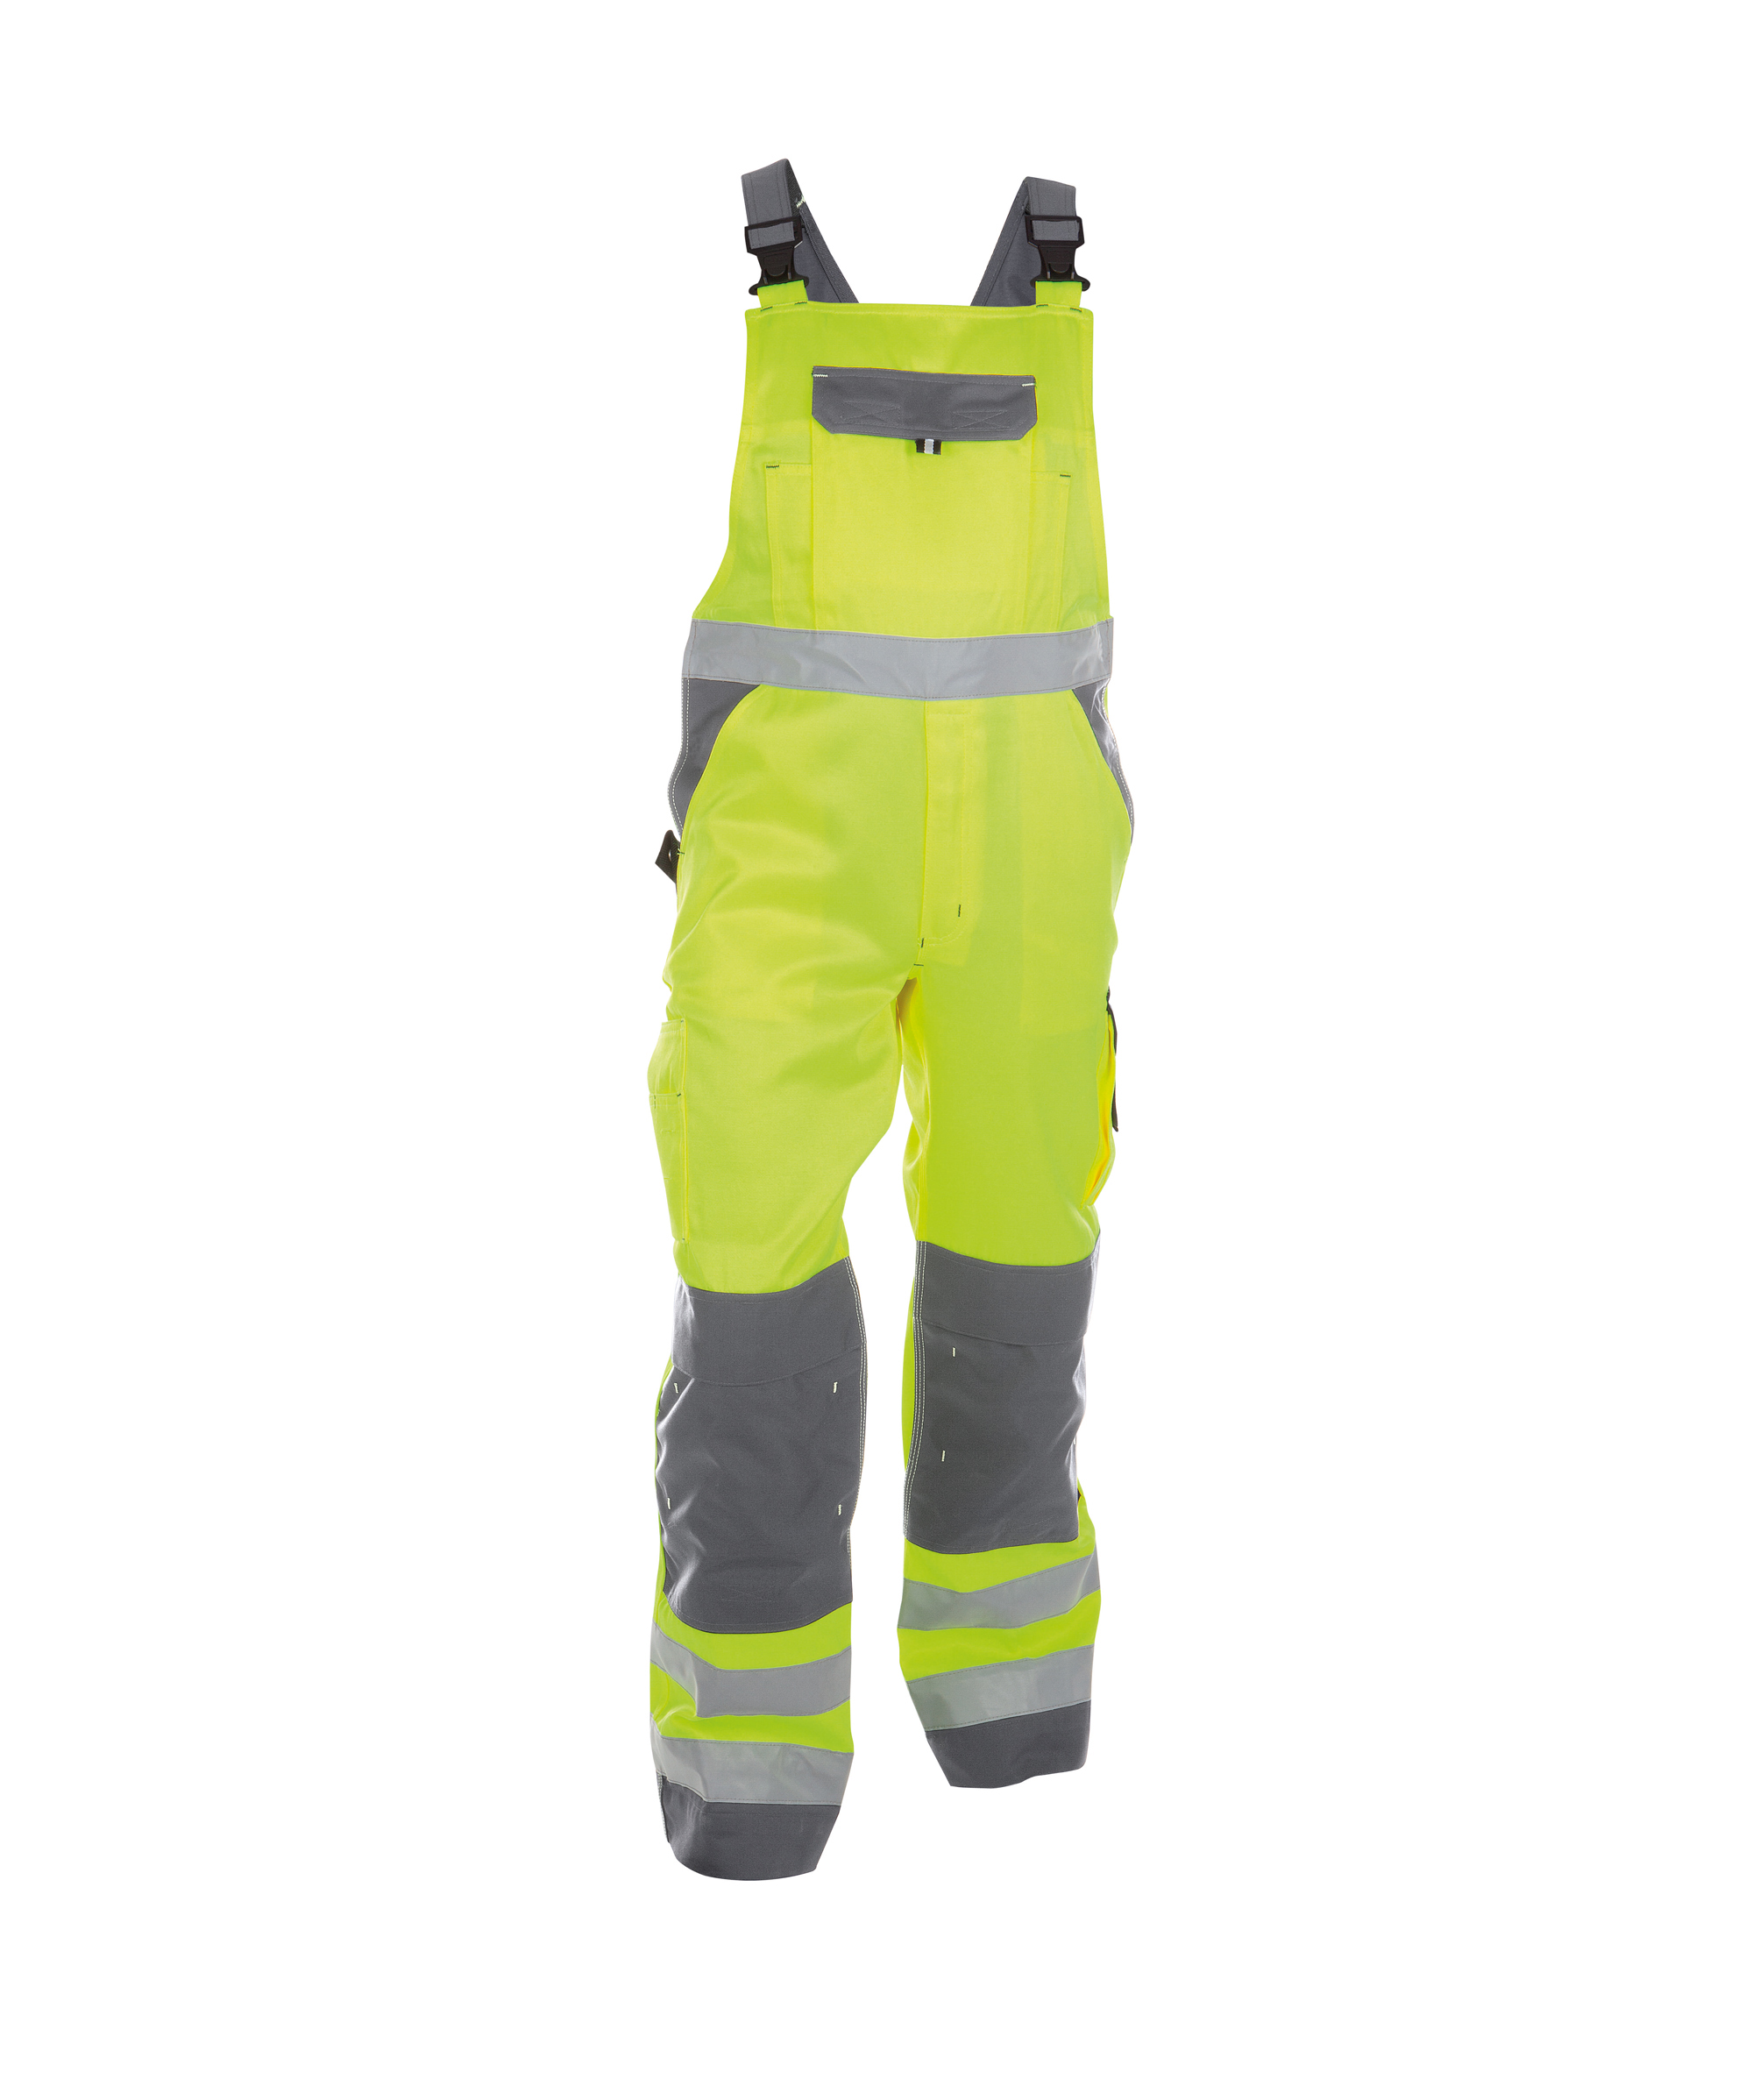 toulouse_high-visibility-brace-overall-with-knee-pockets_fluo-yellow-cement-grey_front.jpg